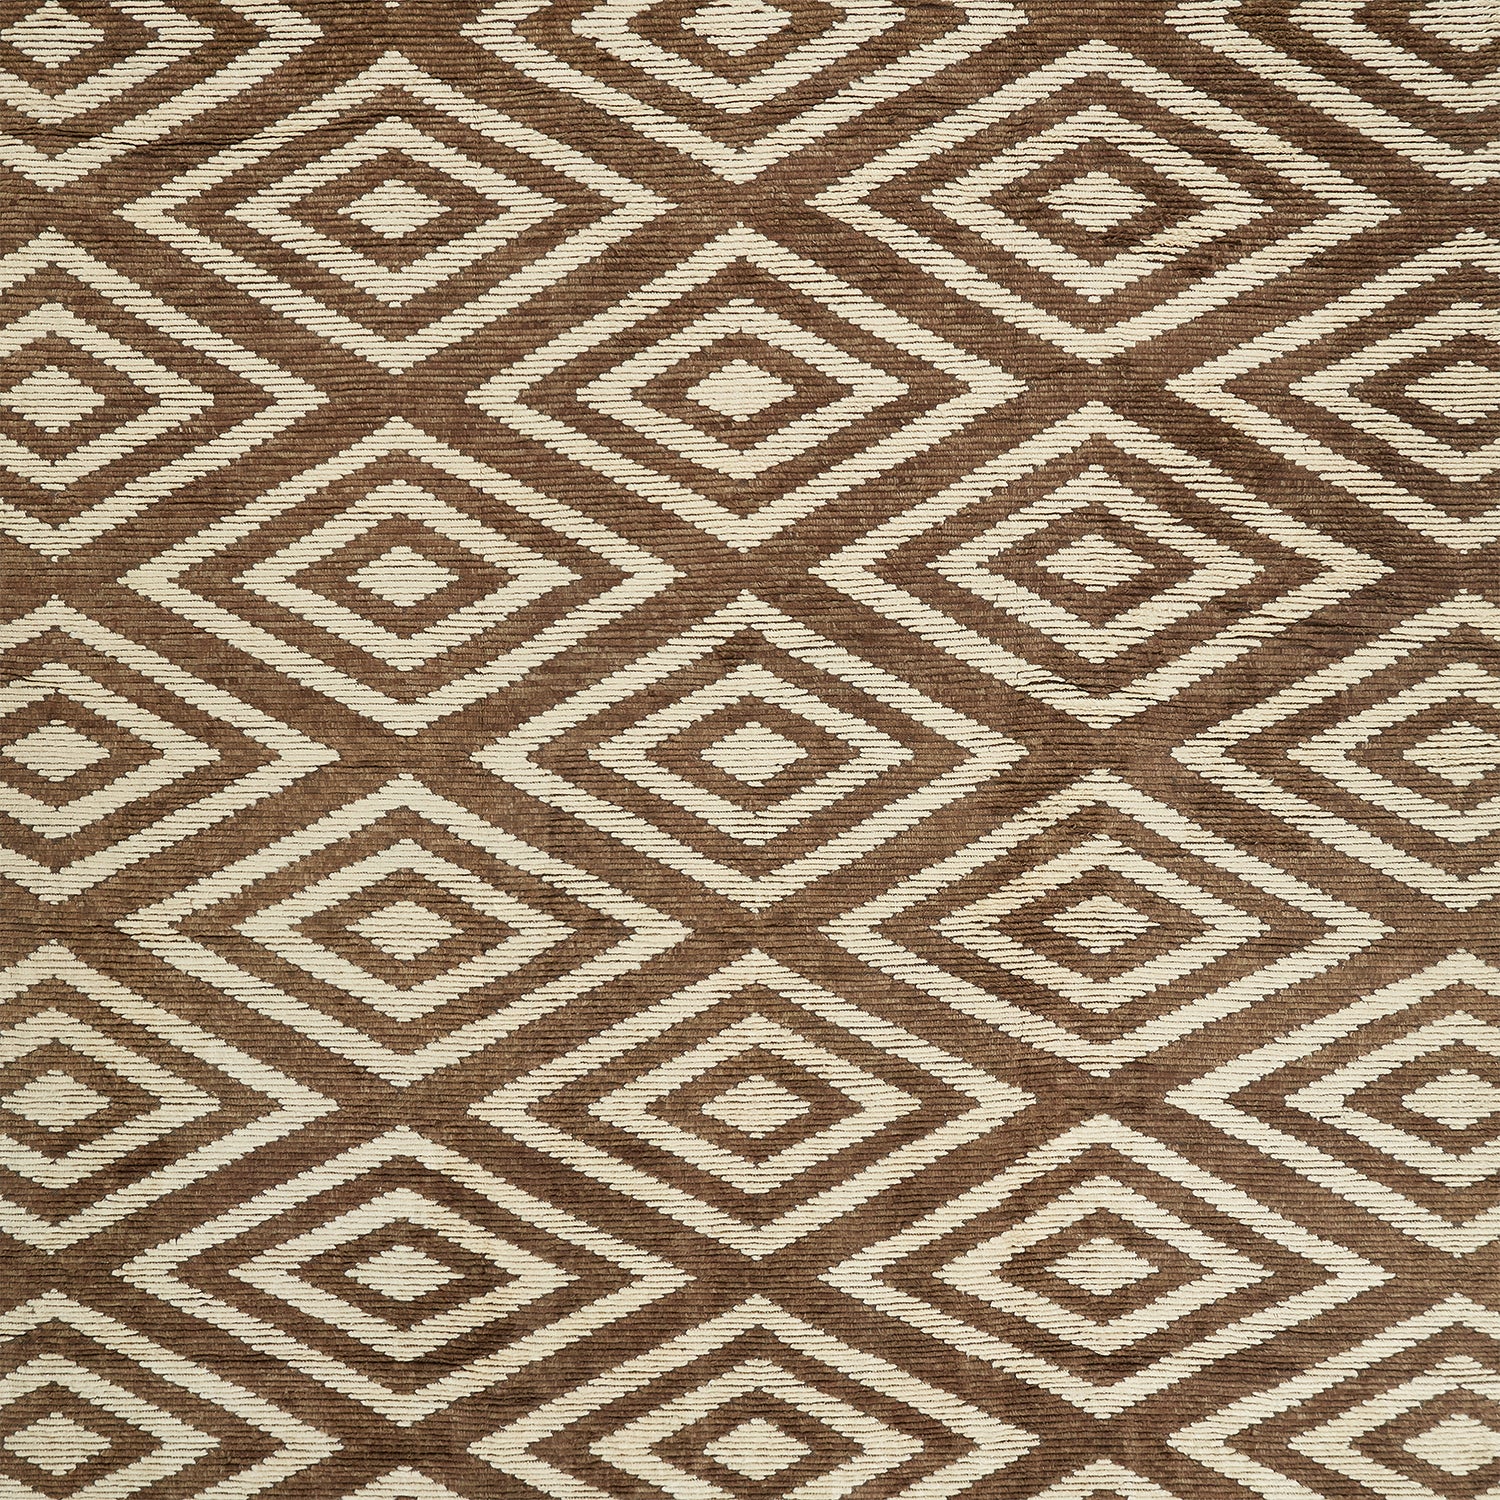 Textile with muted geometric pattern showcasing traditional and modern influences.